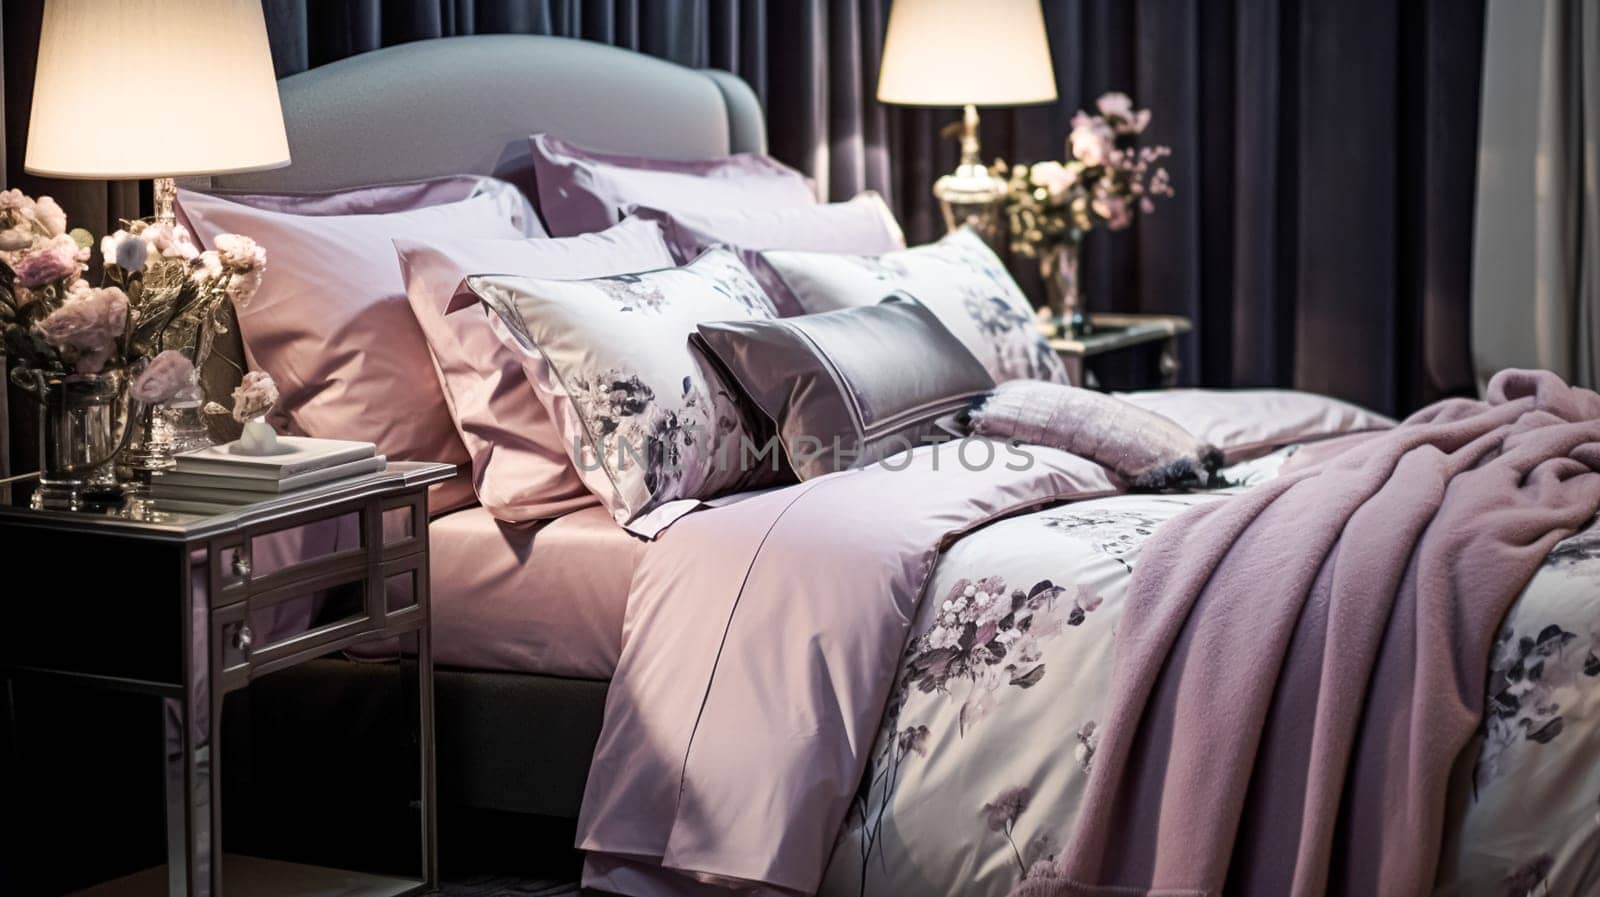 Bedroom decor, modern cottage interior design and home decor, bed linen and elegant country bedding style, lamp and flowers, English countryside house or holiday rental interiors